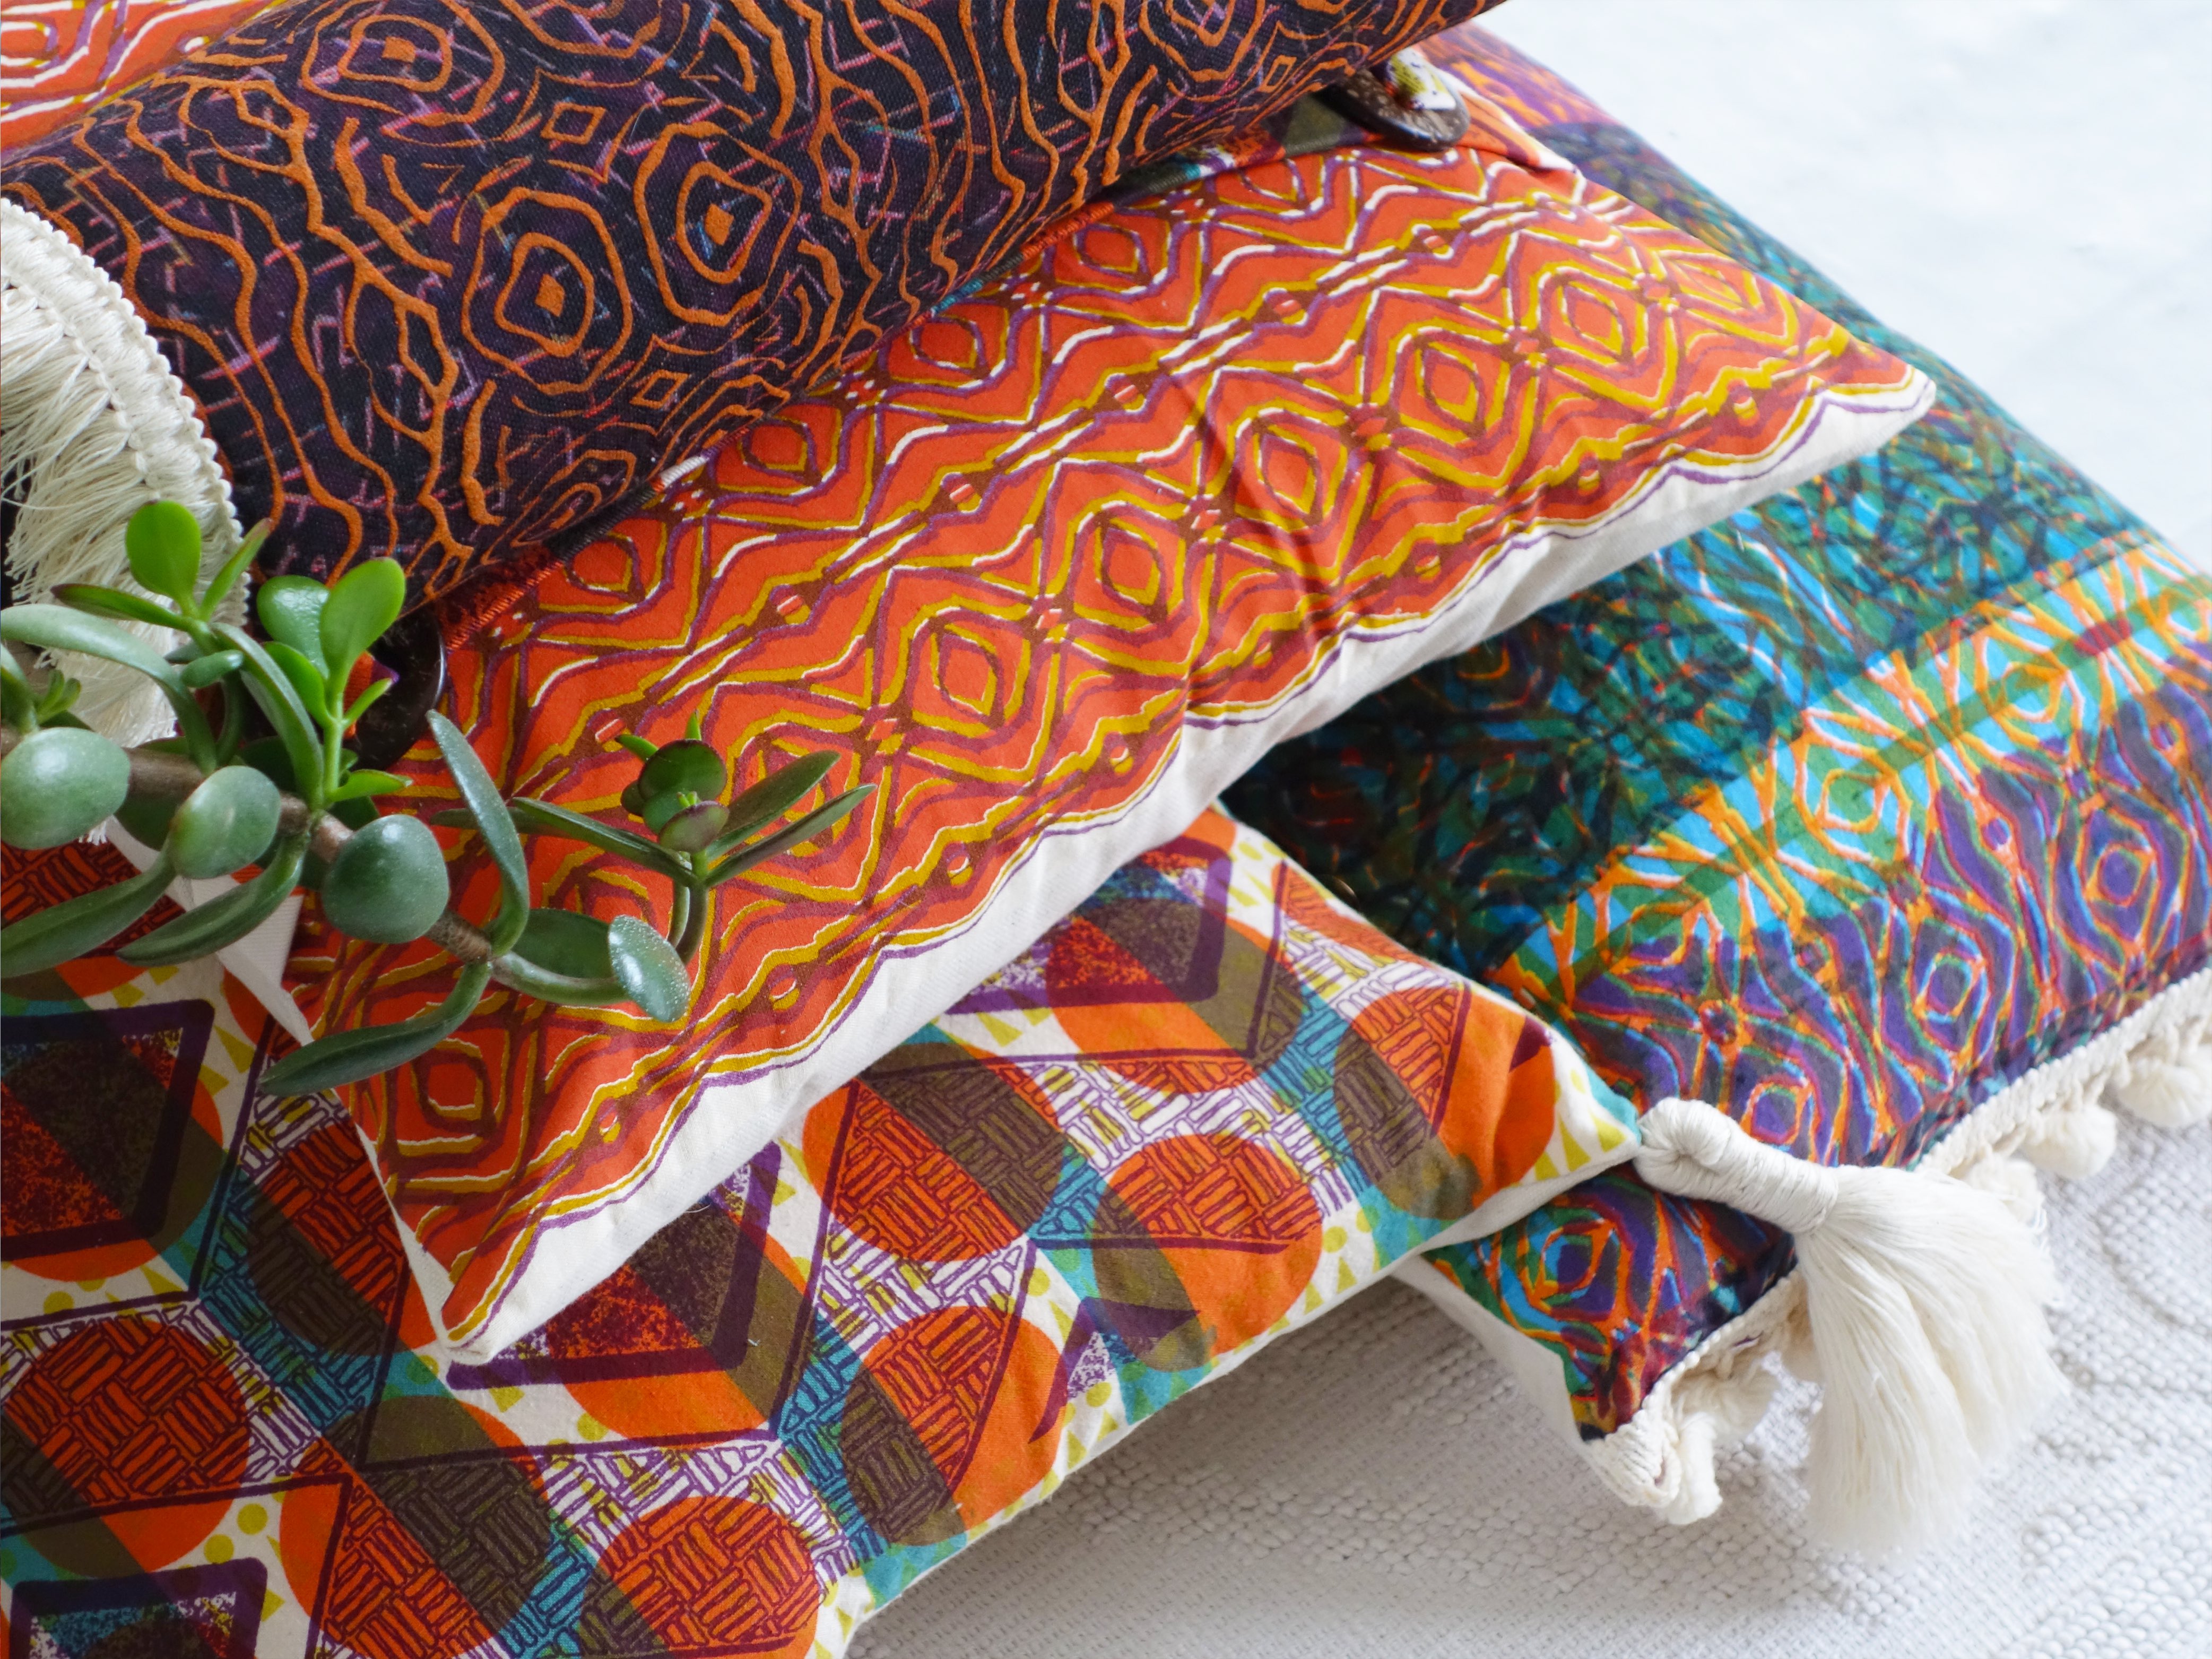 MA Textile Design work by Marna Alberts showing a collection of interior cushions in various colour and pattern.